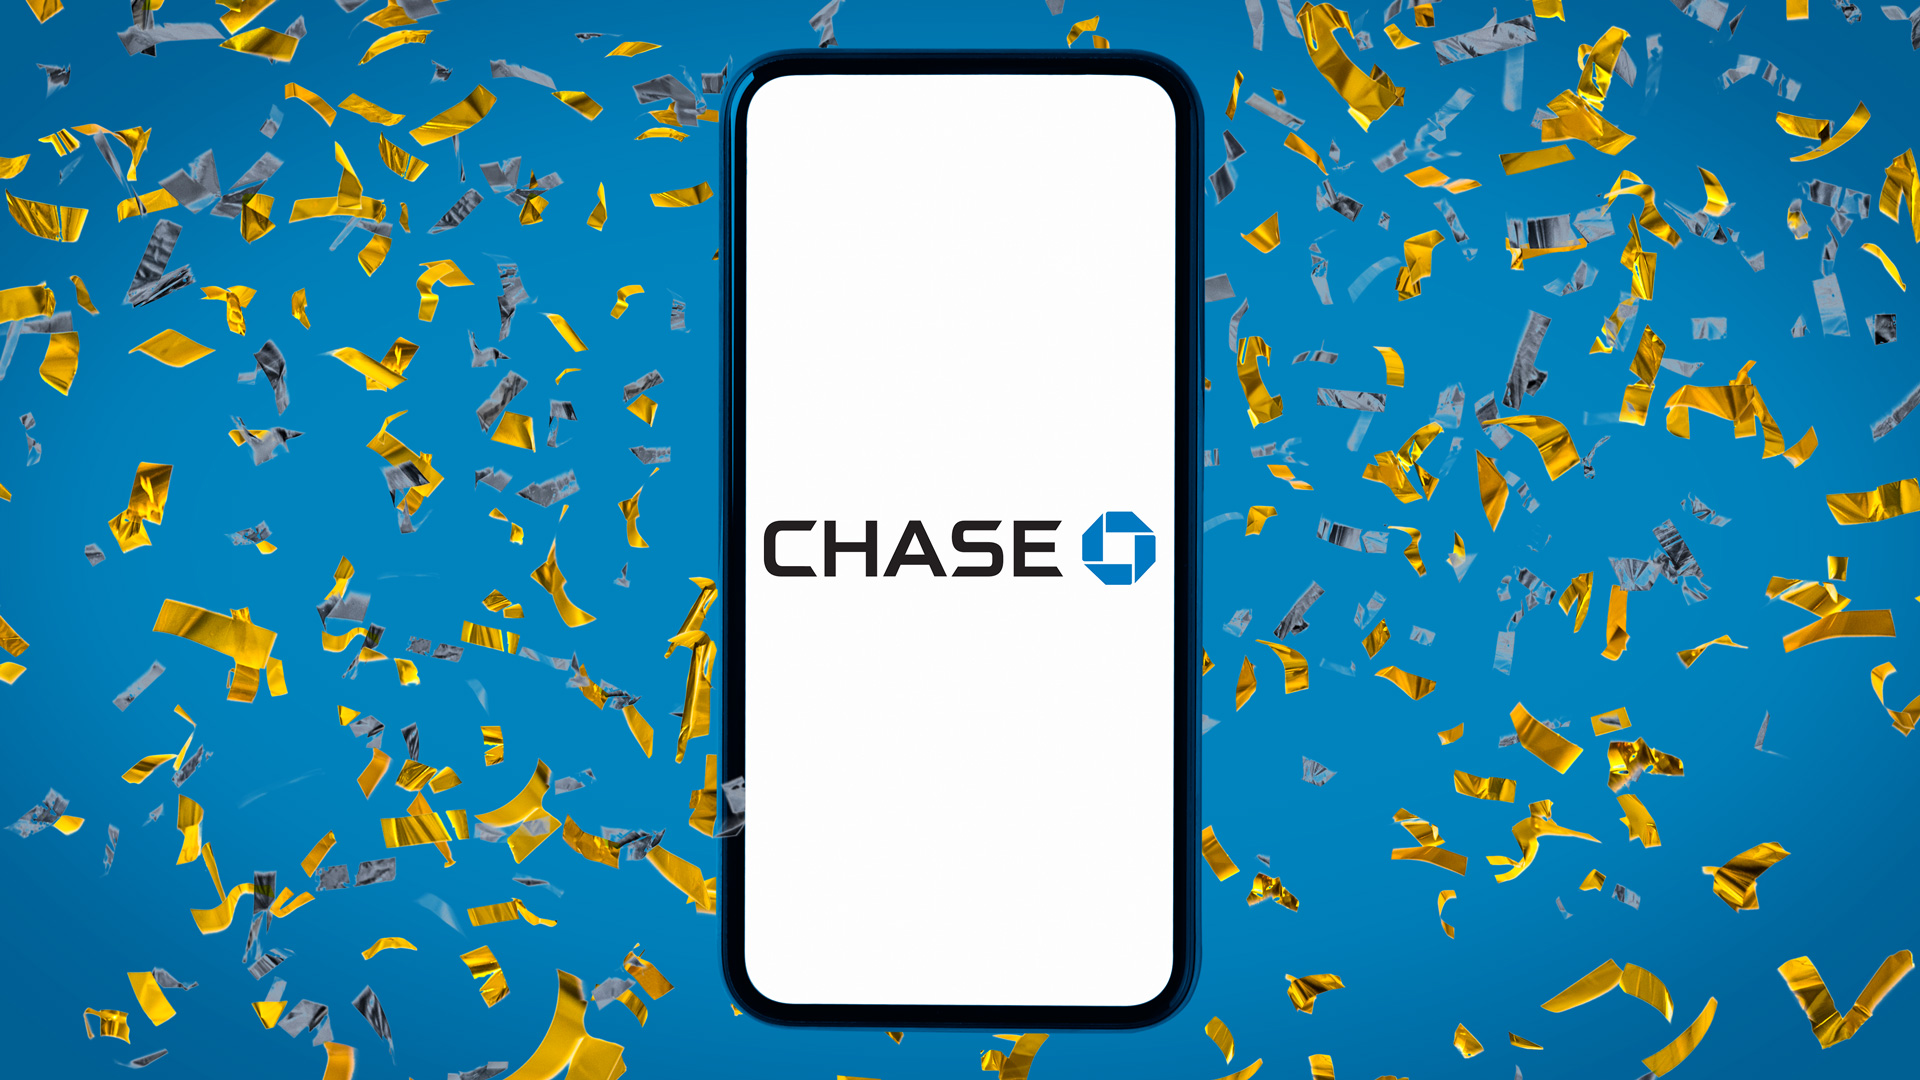 Earn $250 just for signing up with Chase Banking!